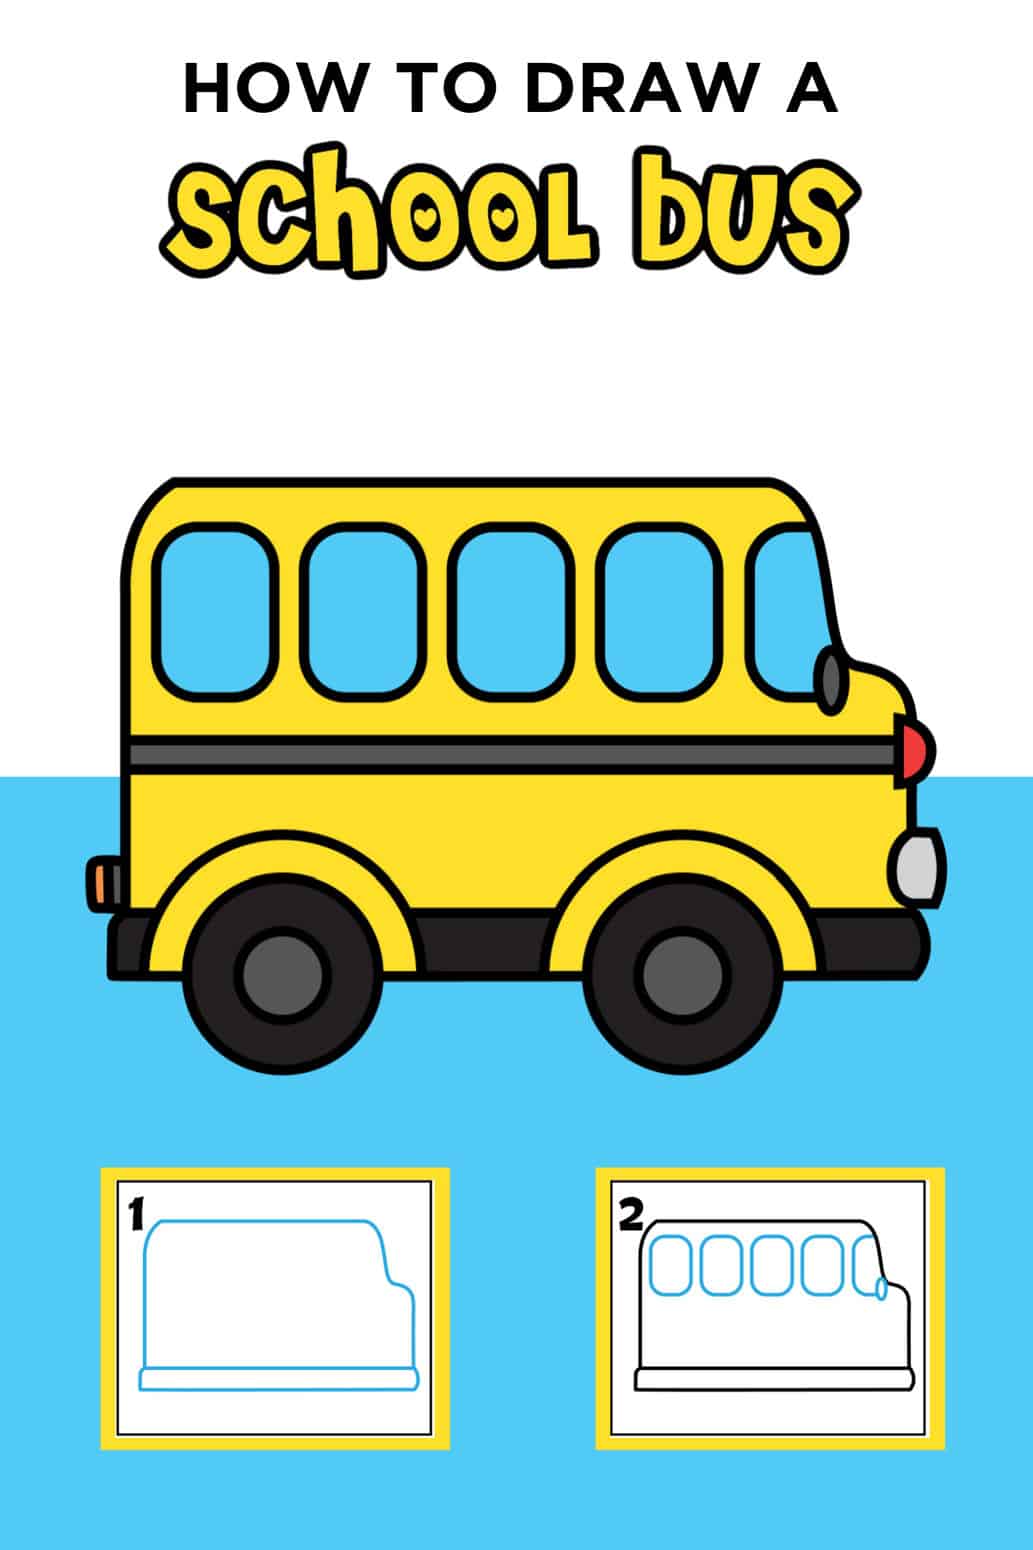 How To Draw a School Bus - Made with HAPPY